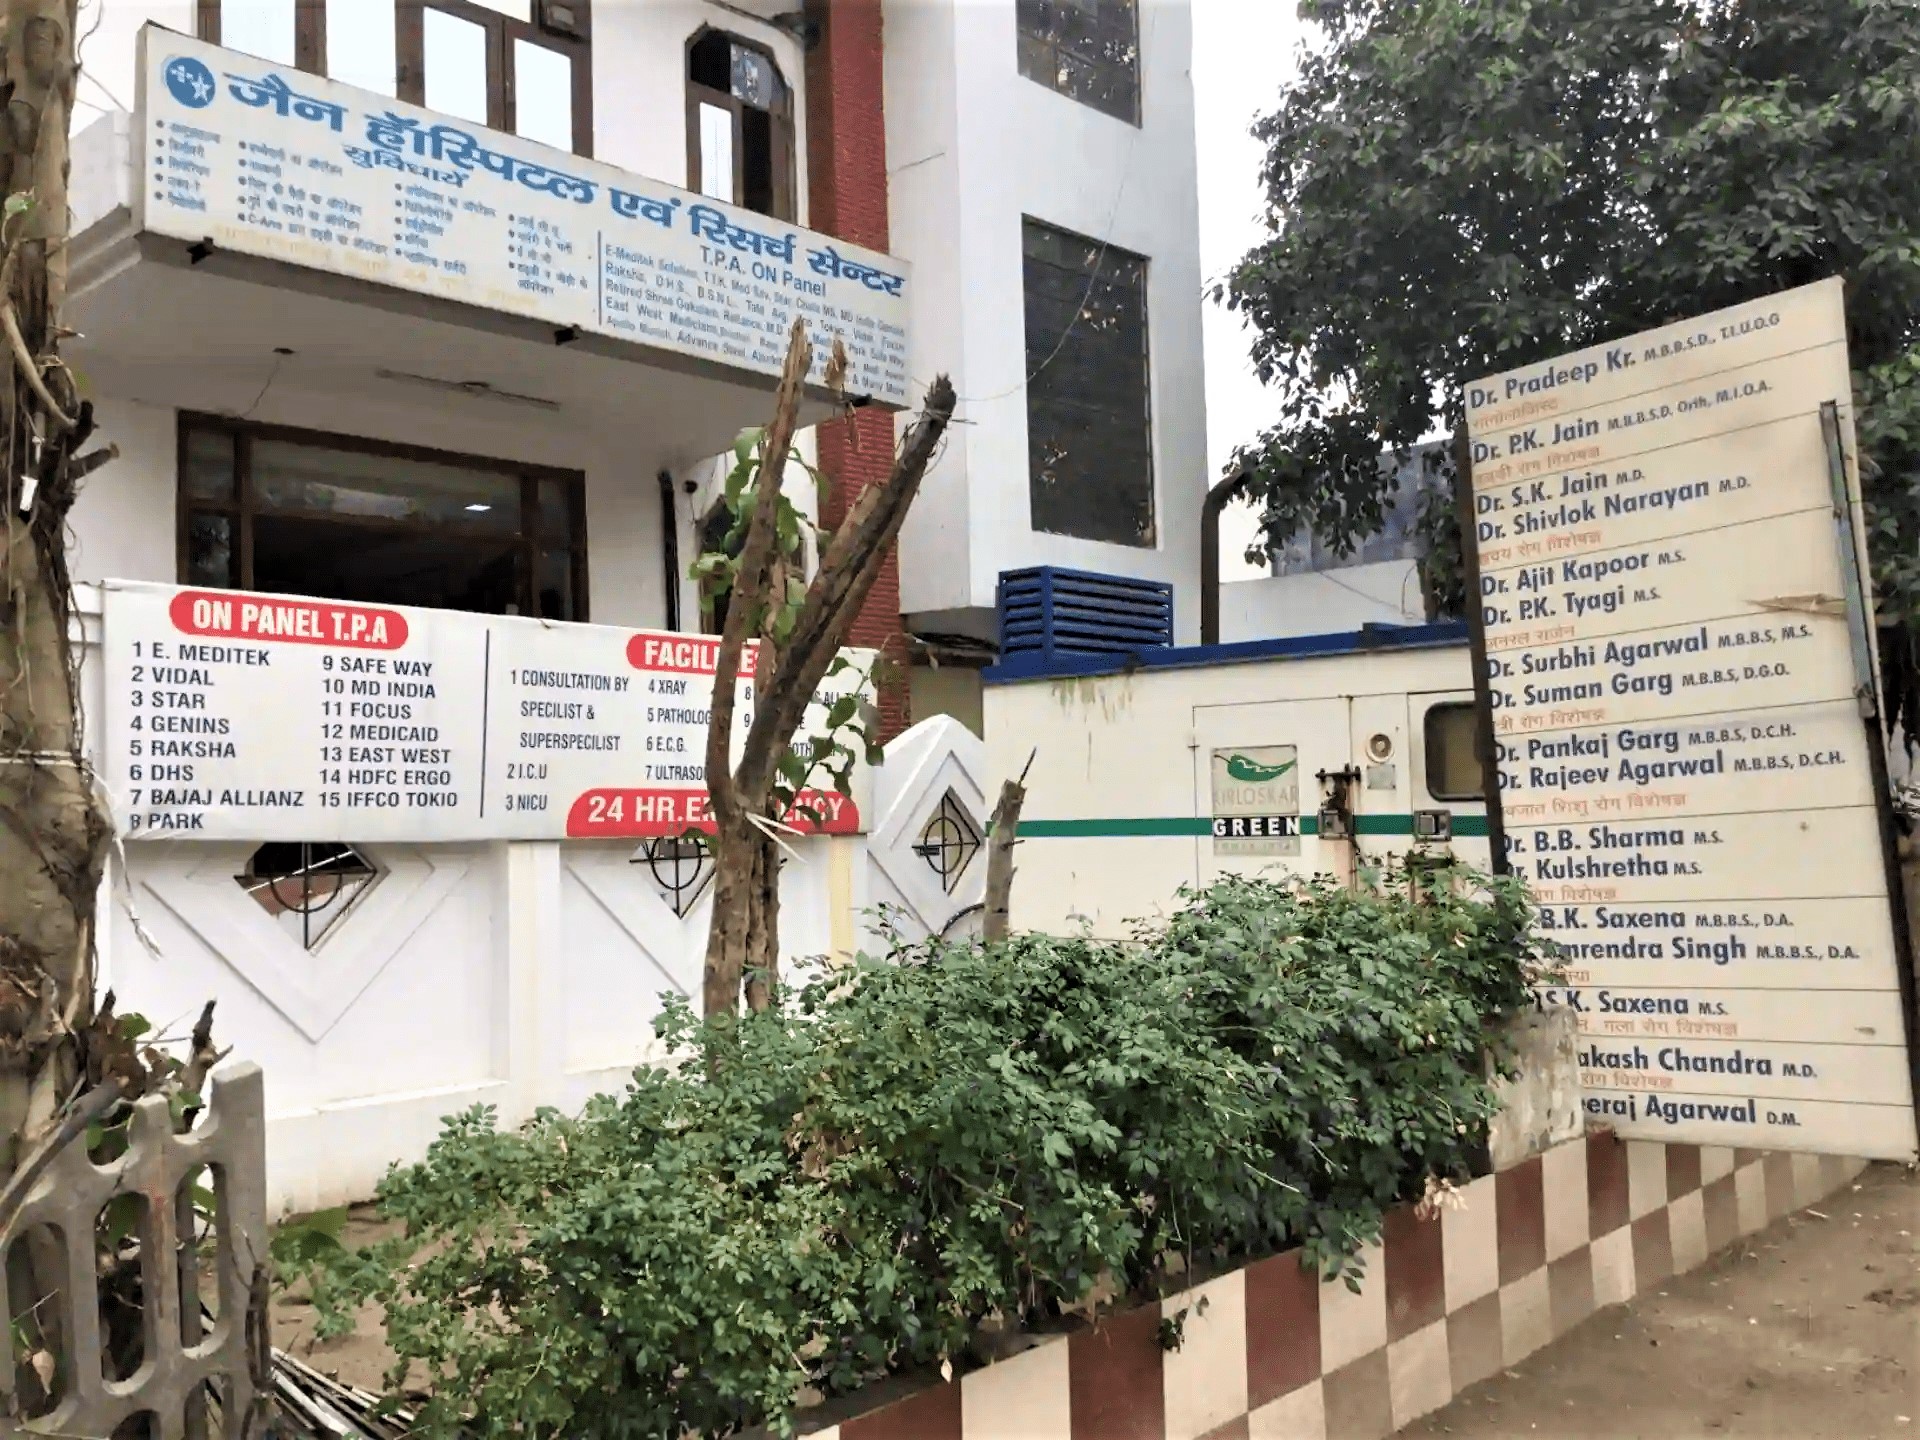 Jain Hospital And Research Centre